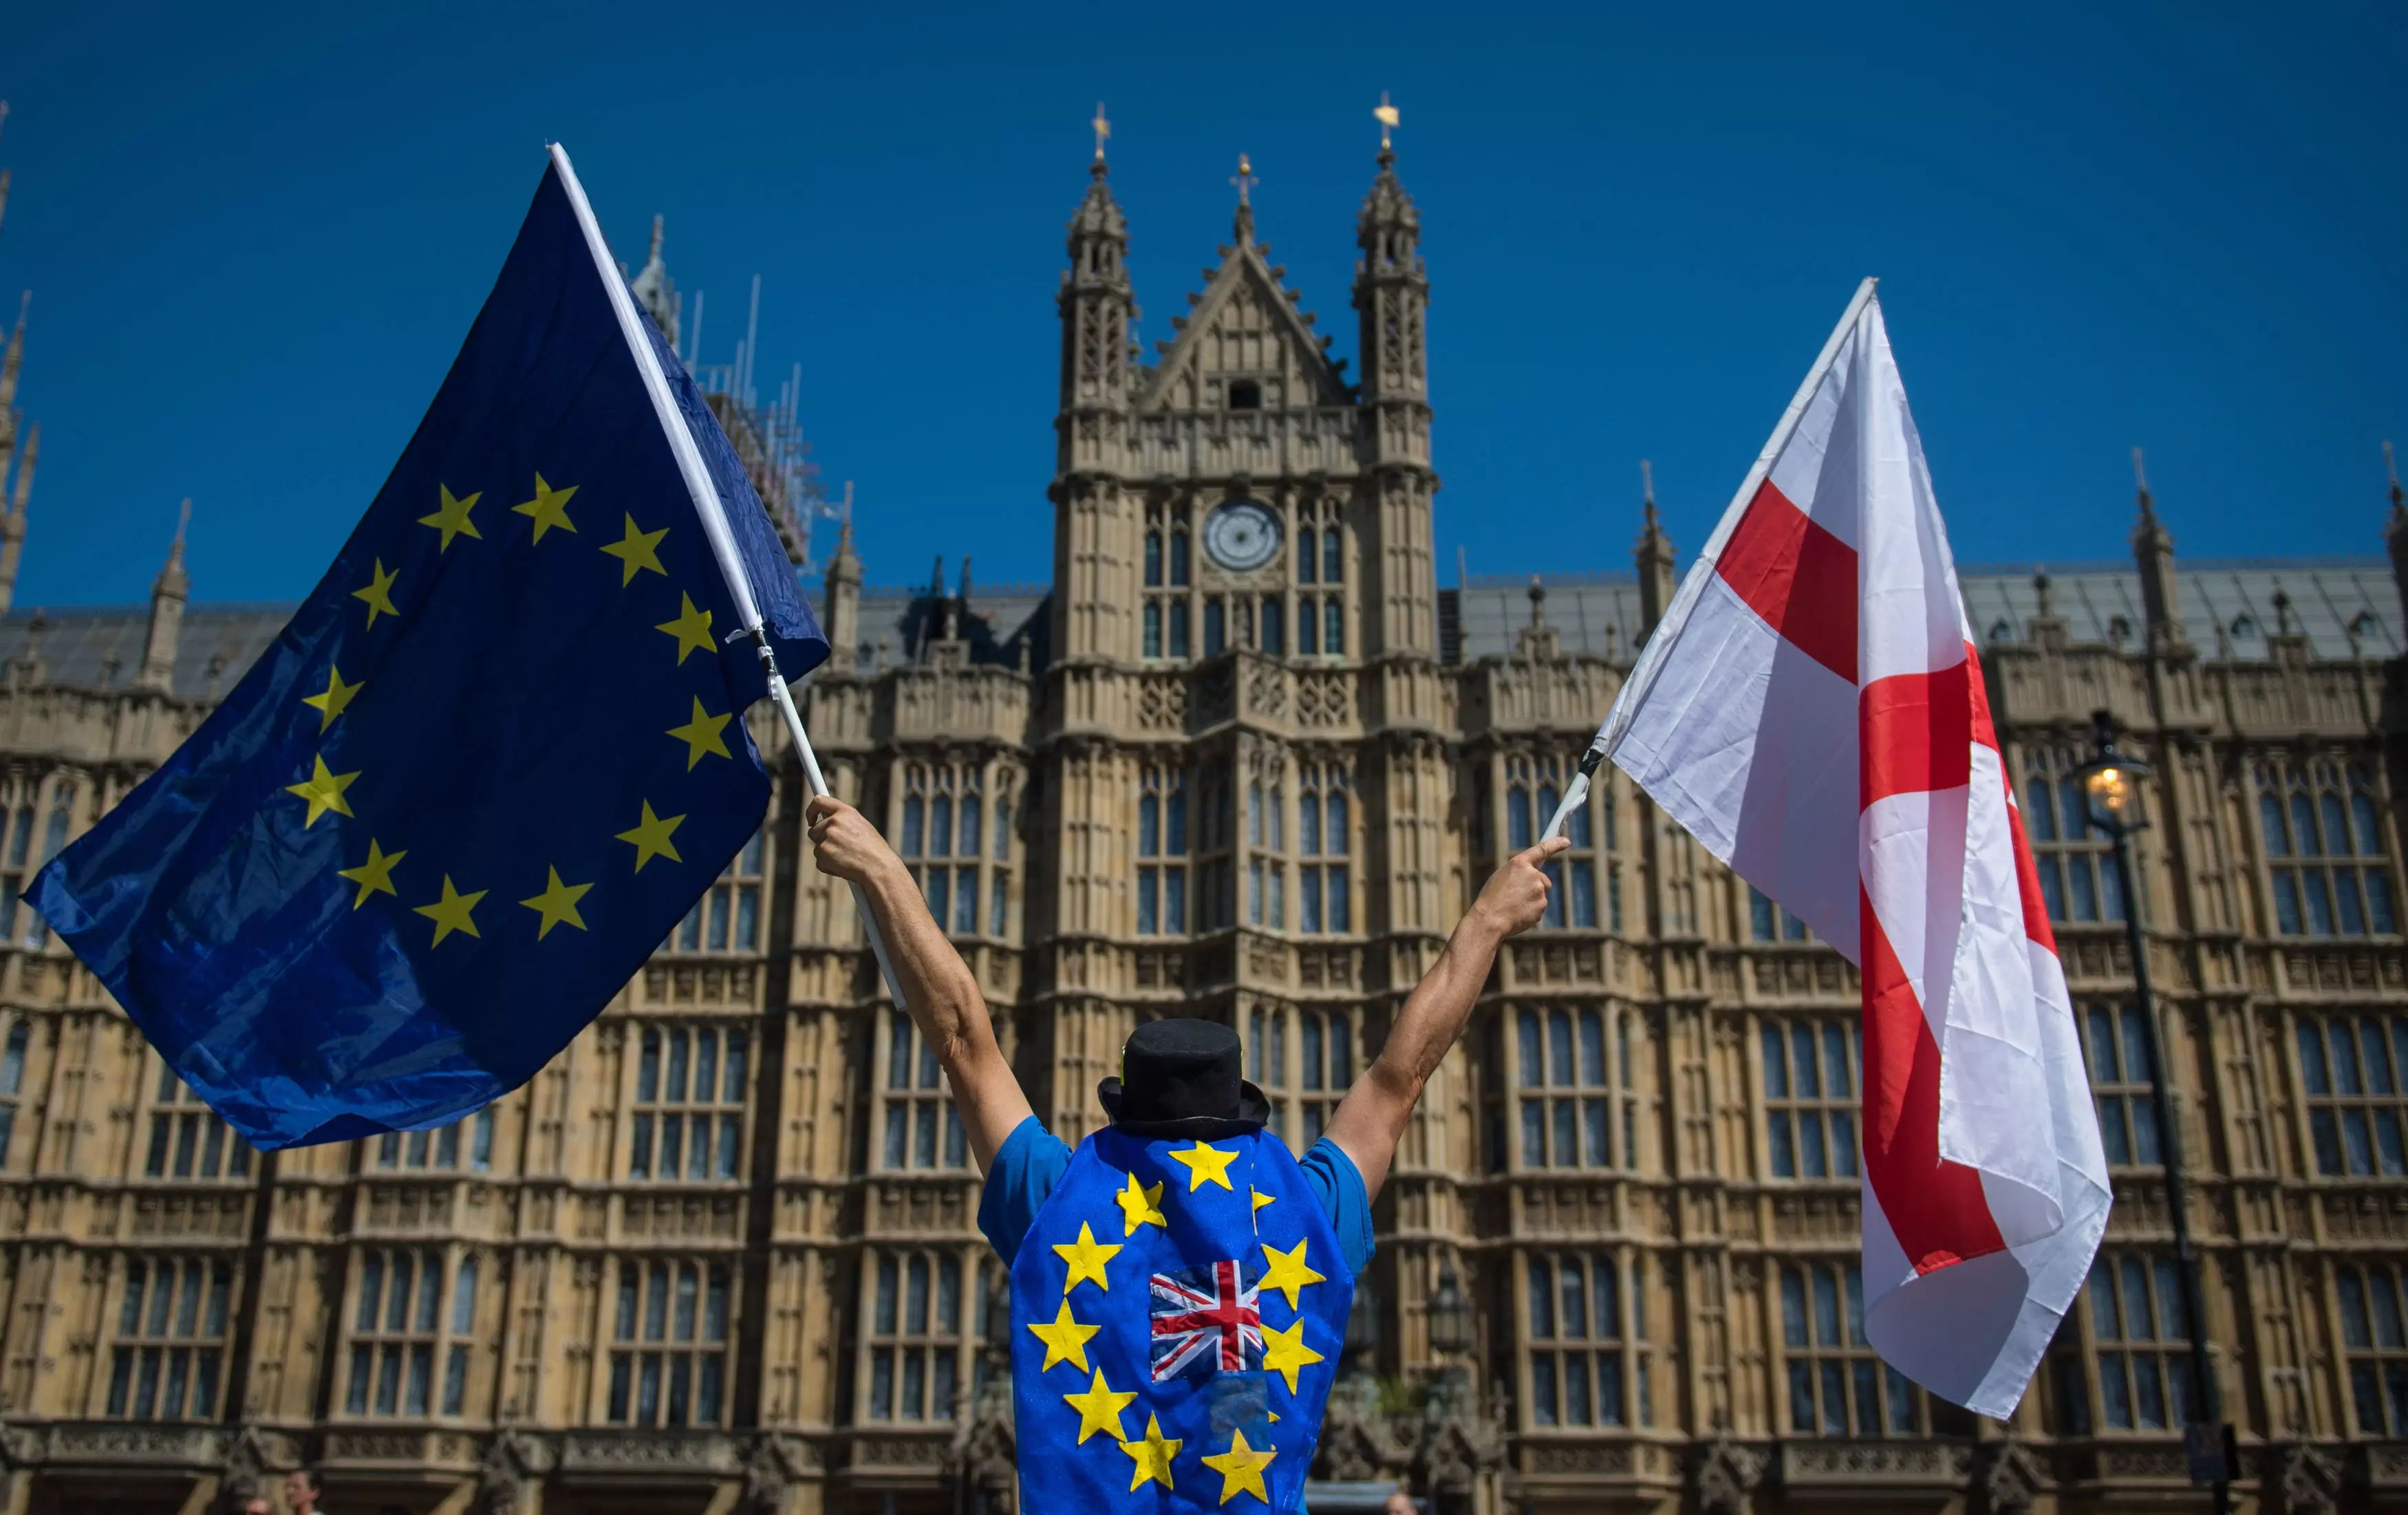 In the 2016 referendum, 48 percent of UK voters wanted to remain in the EU.